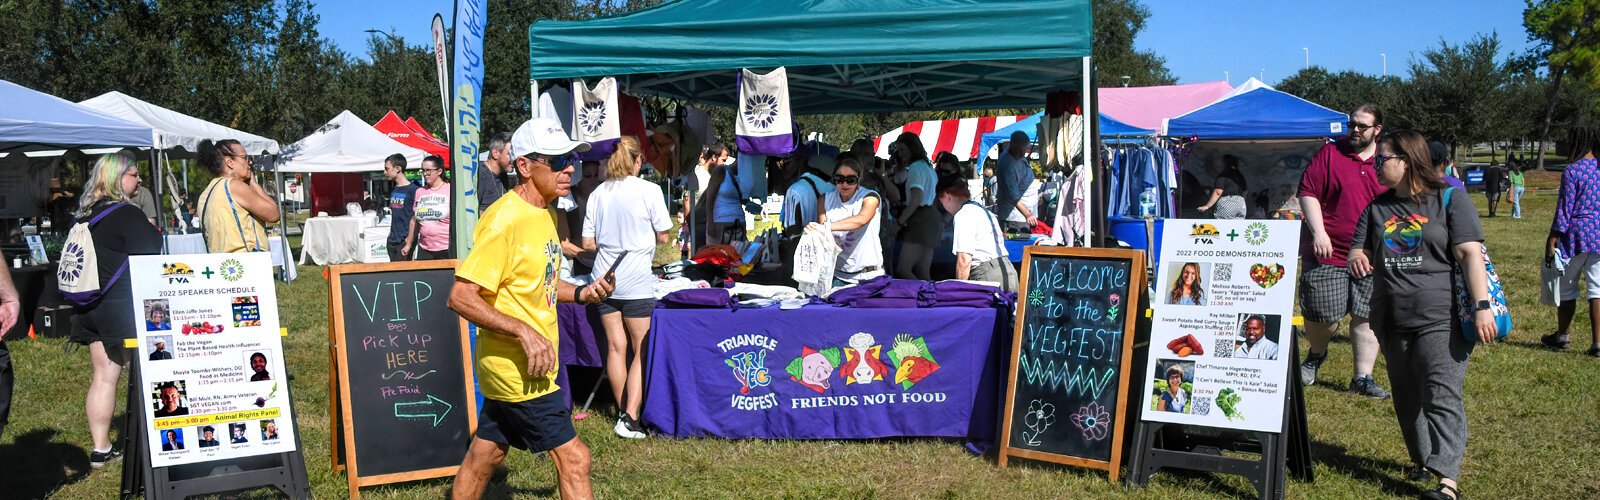  Presented by Triangle VegFest and Florida Voices for Animals, the Tampa Bay VegFest 2022 offered a diverse experience  to learn about living a healthy, compassionate and eco-friendly lifestyle. 